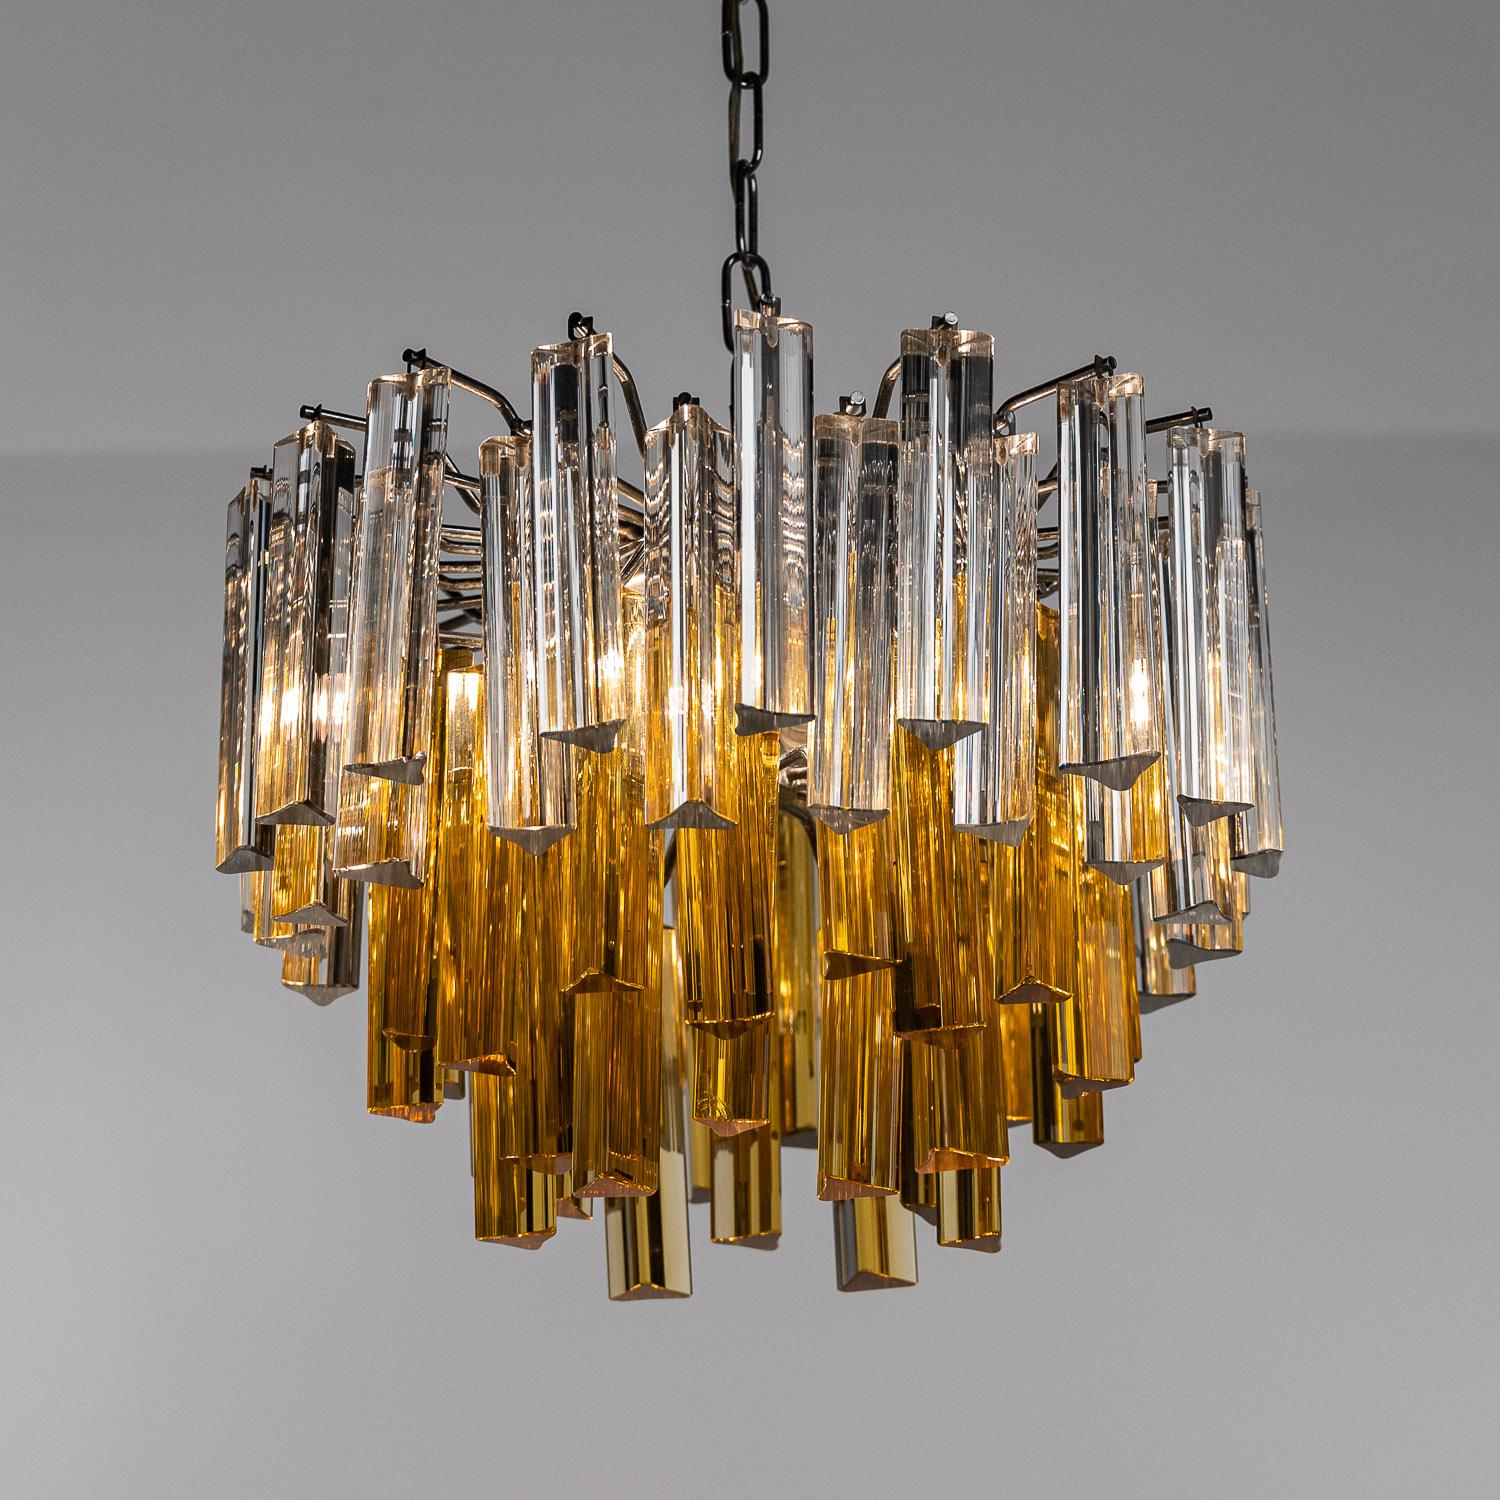 1960s Glass and Chrome Chandelier Attributed to Venini For Sale 7